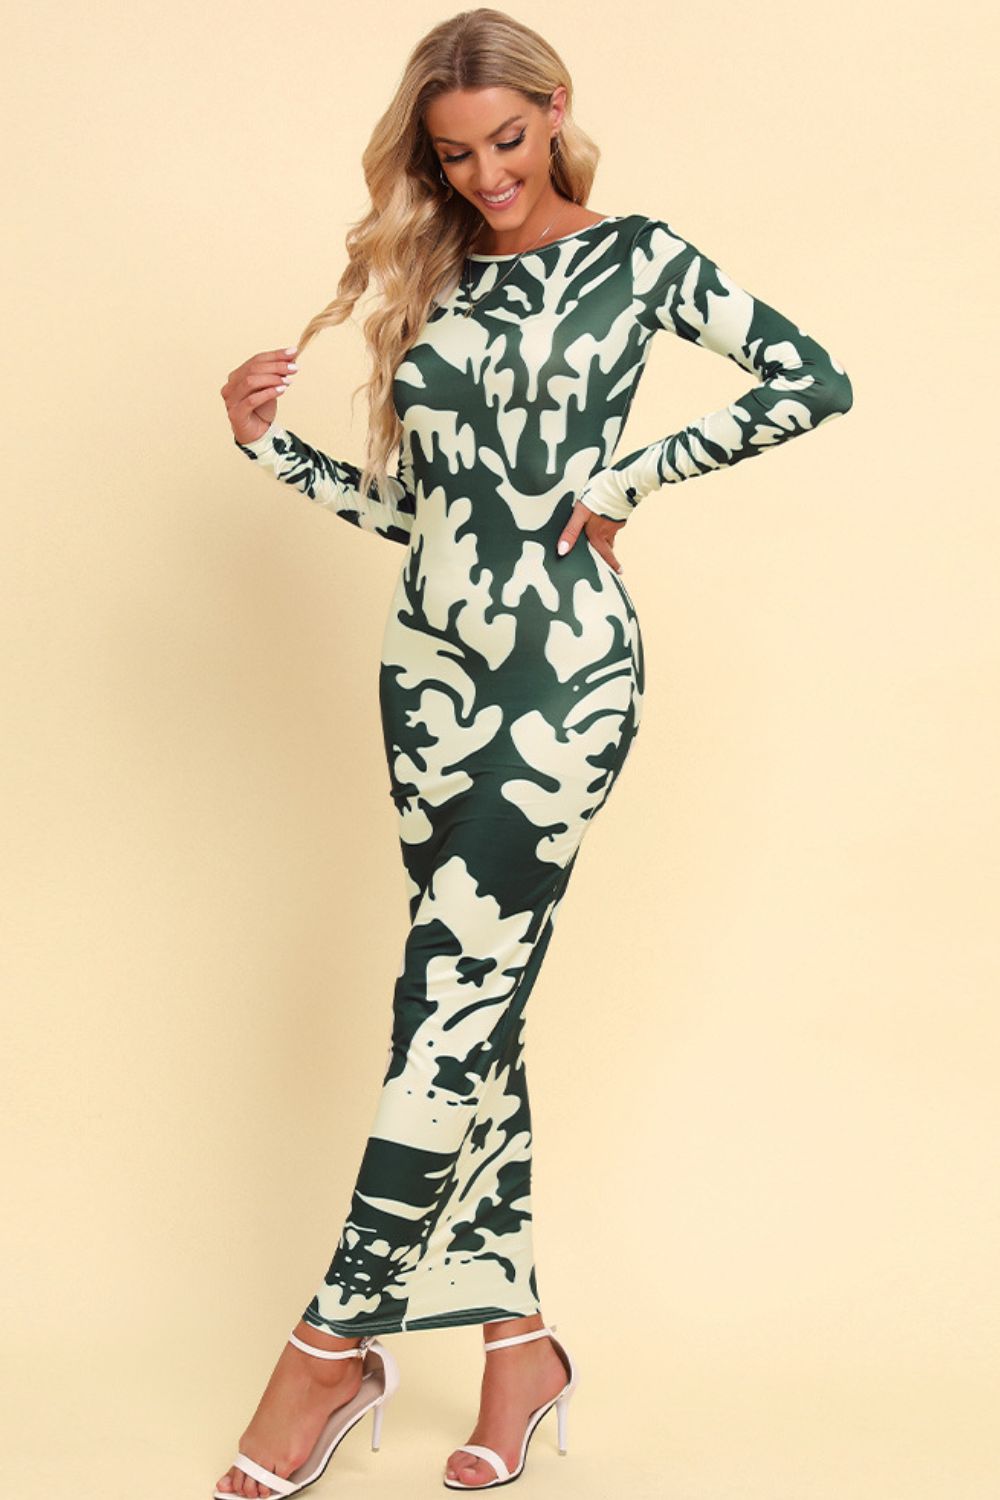 Wheat Printed Backless Long Sleeve Maxi Dress Clothes